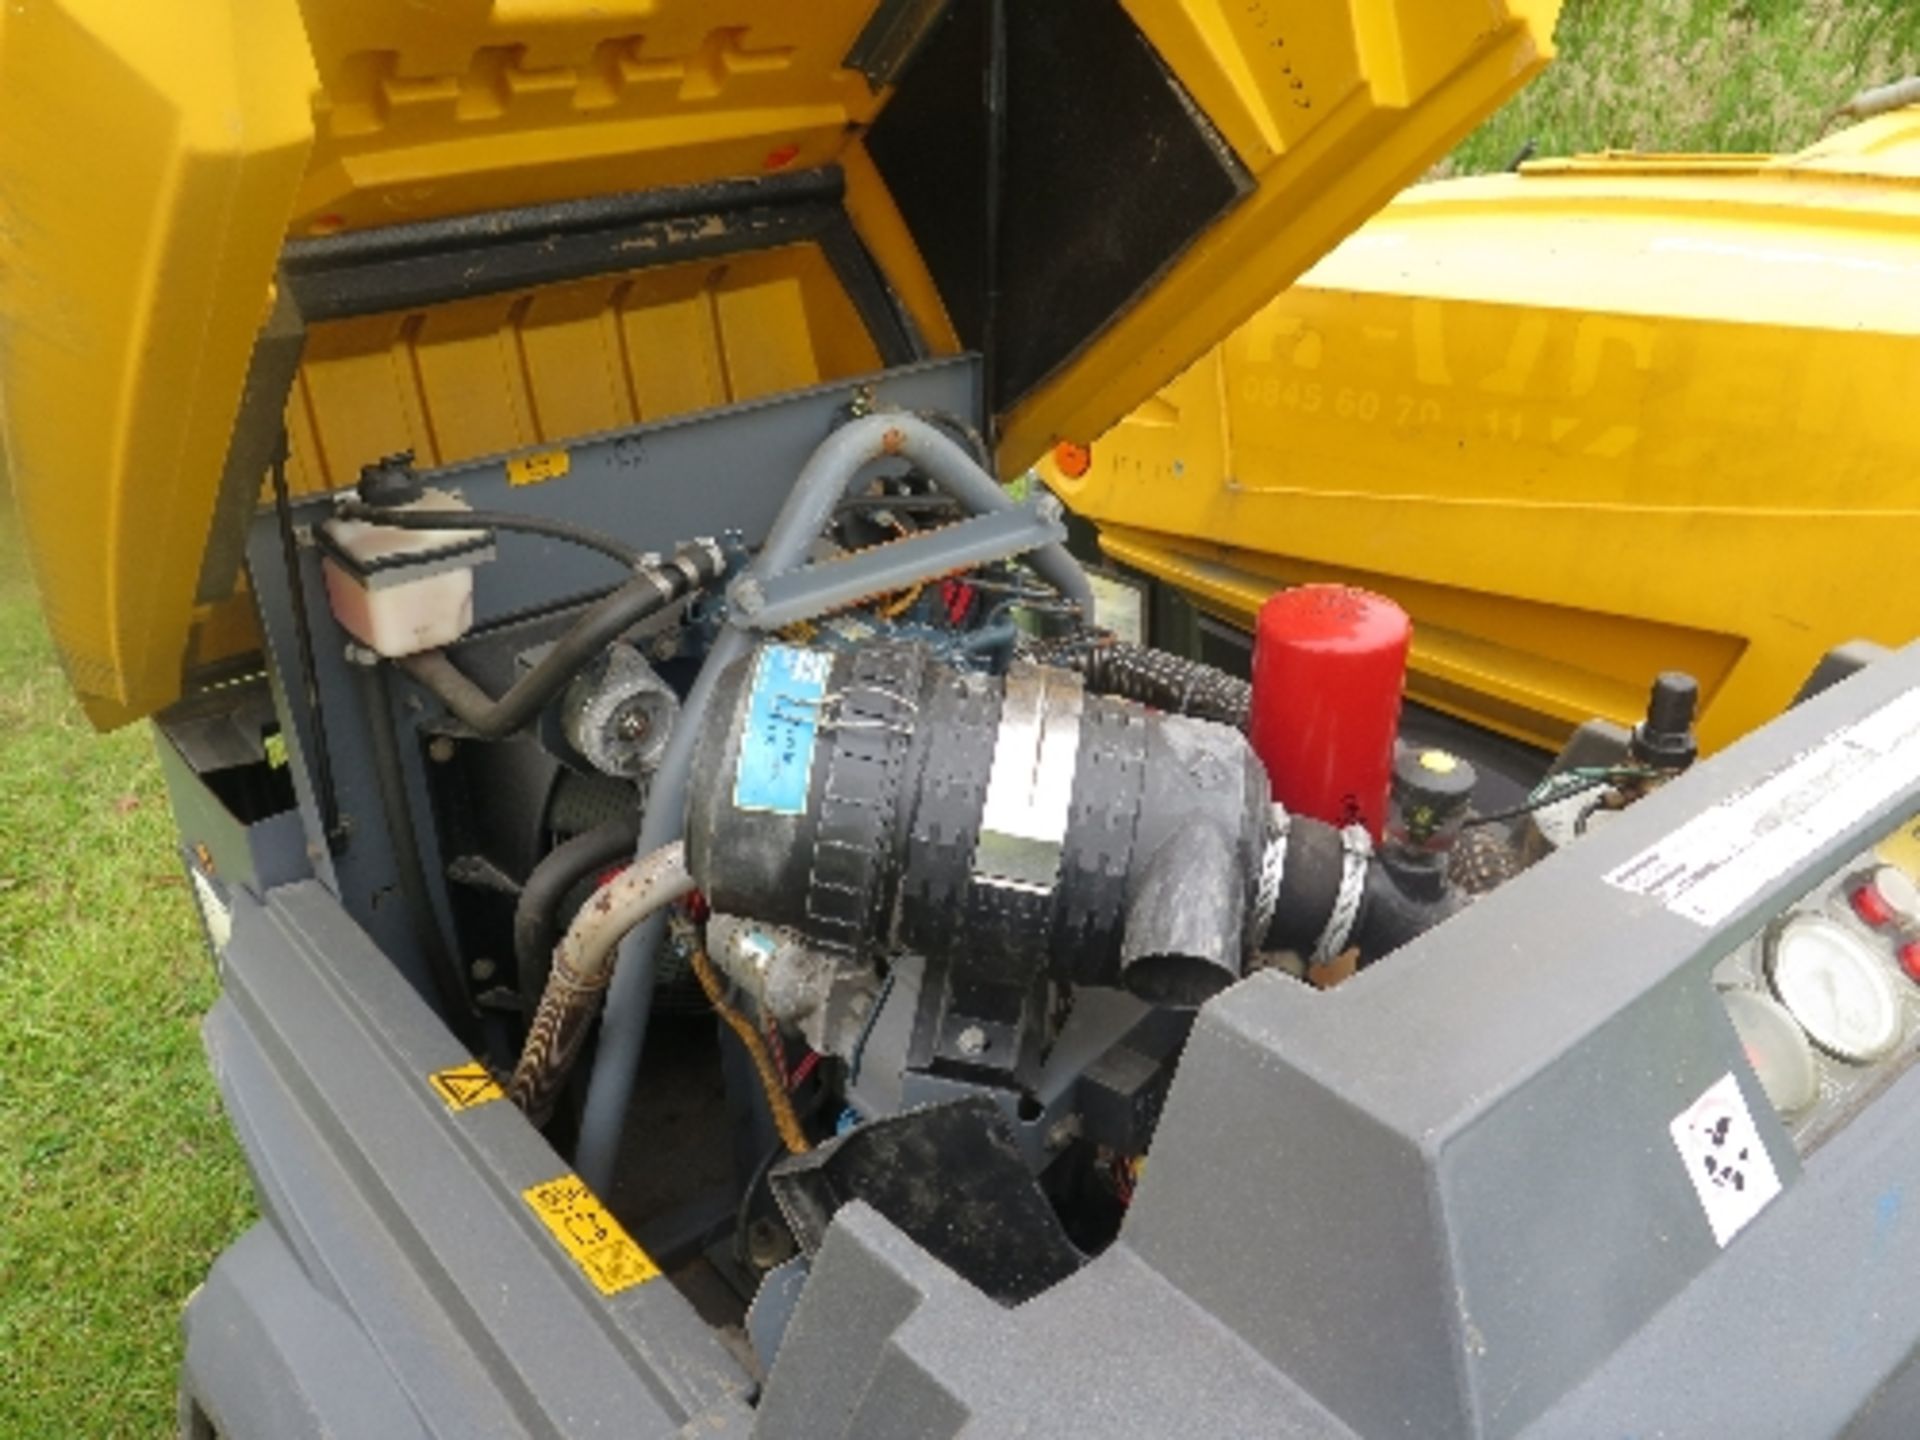 Atlas Copco XAS47 compressor 2008 5002443
618 HOURS - KUBOTA POWER - RUNS AND MAKES AIR
ALL LOTS - Image 4 of 5